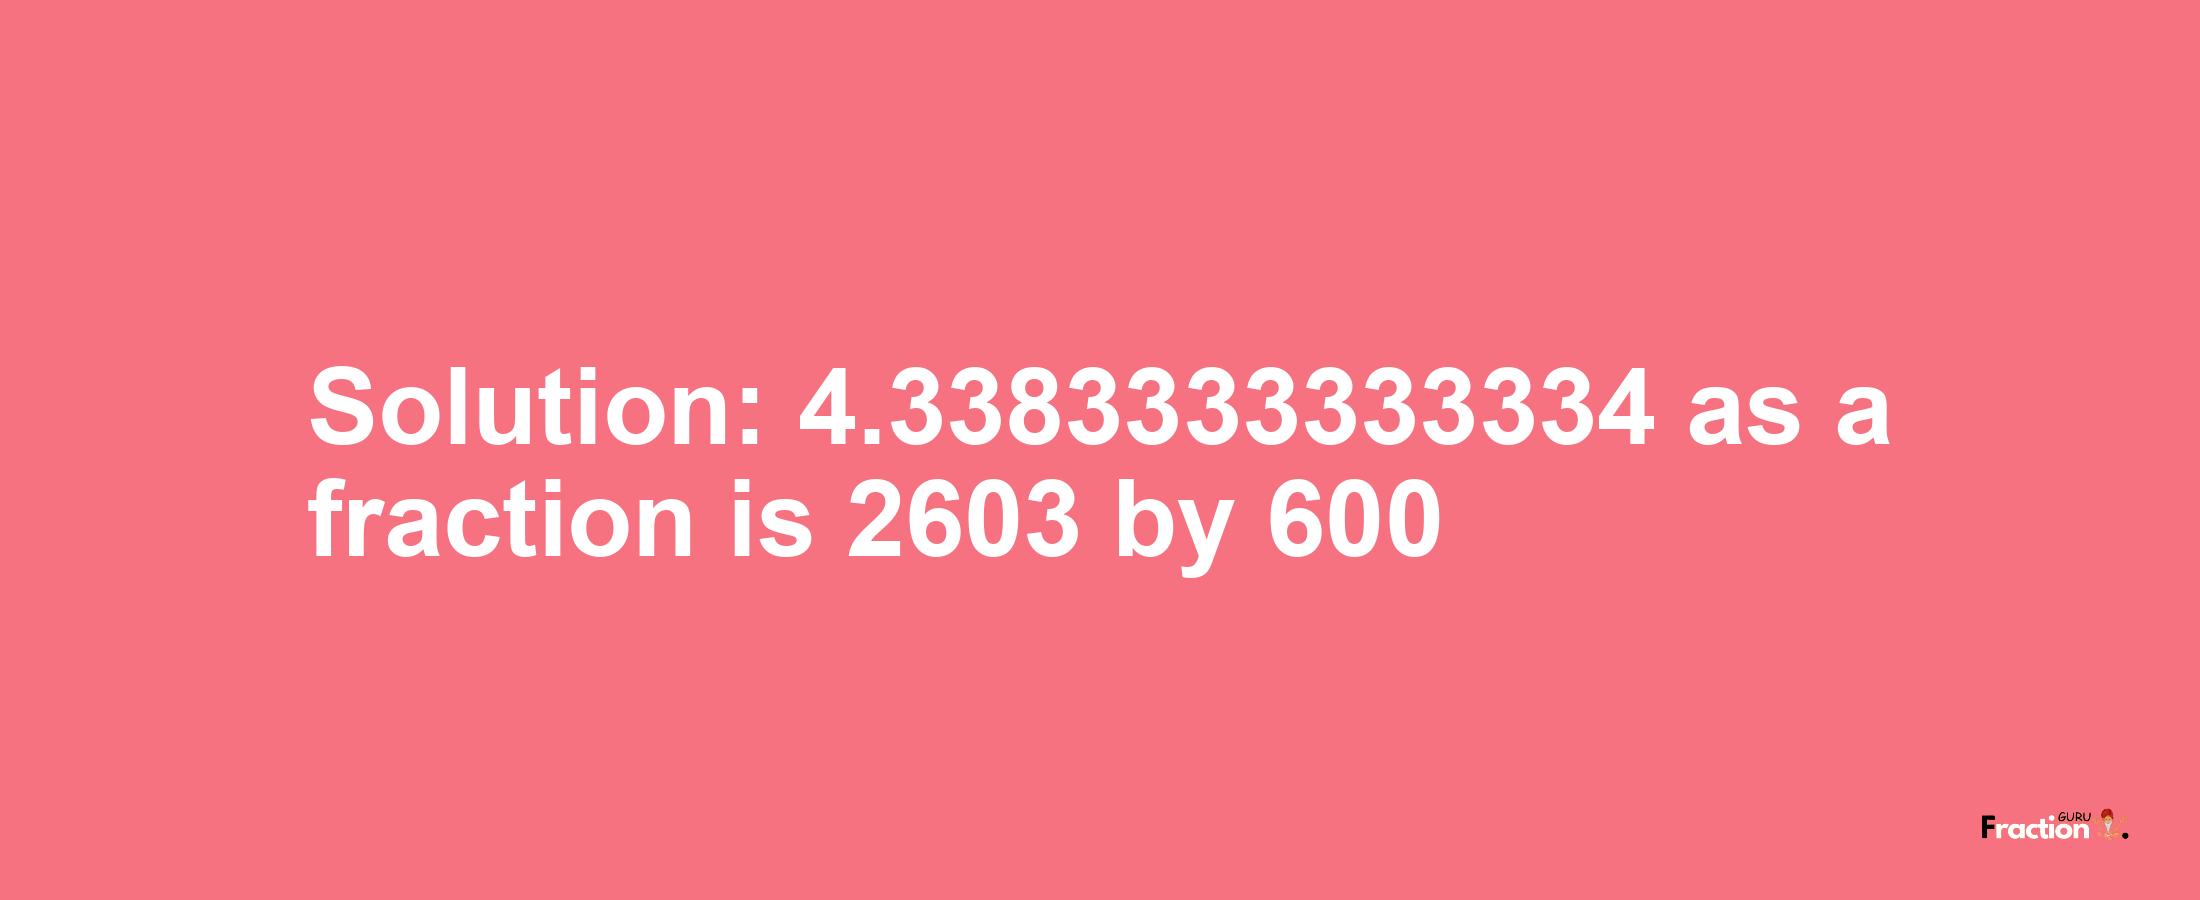 Solution:4.3383333333334 as a fraction is 2603/600